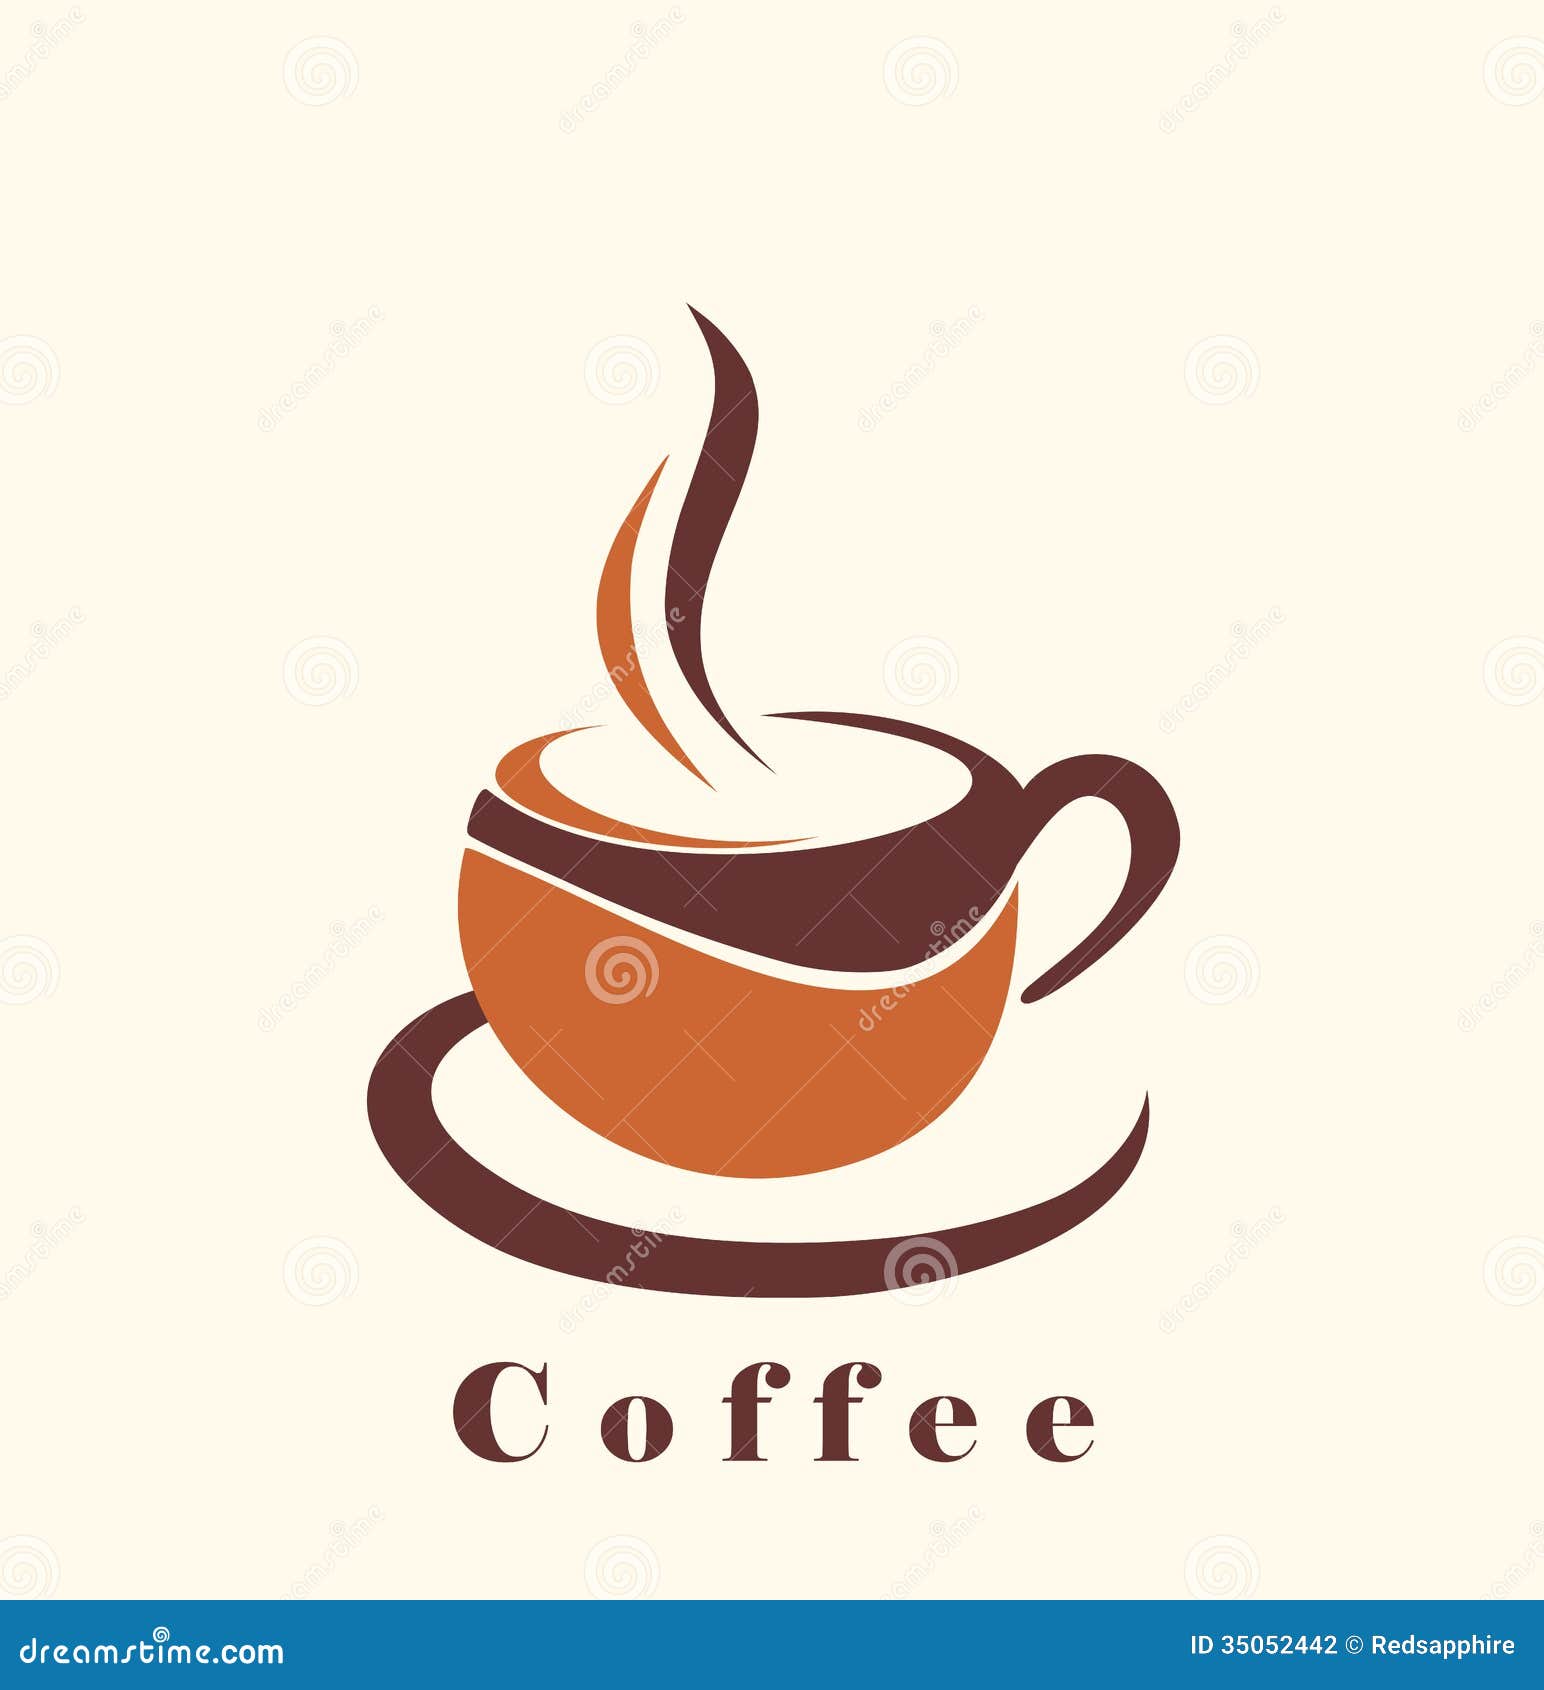 clipart coffee cup icon - photo #36